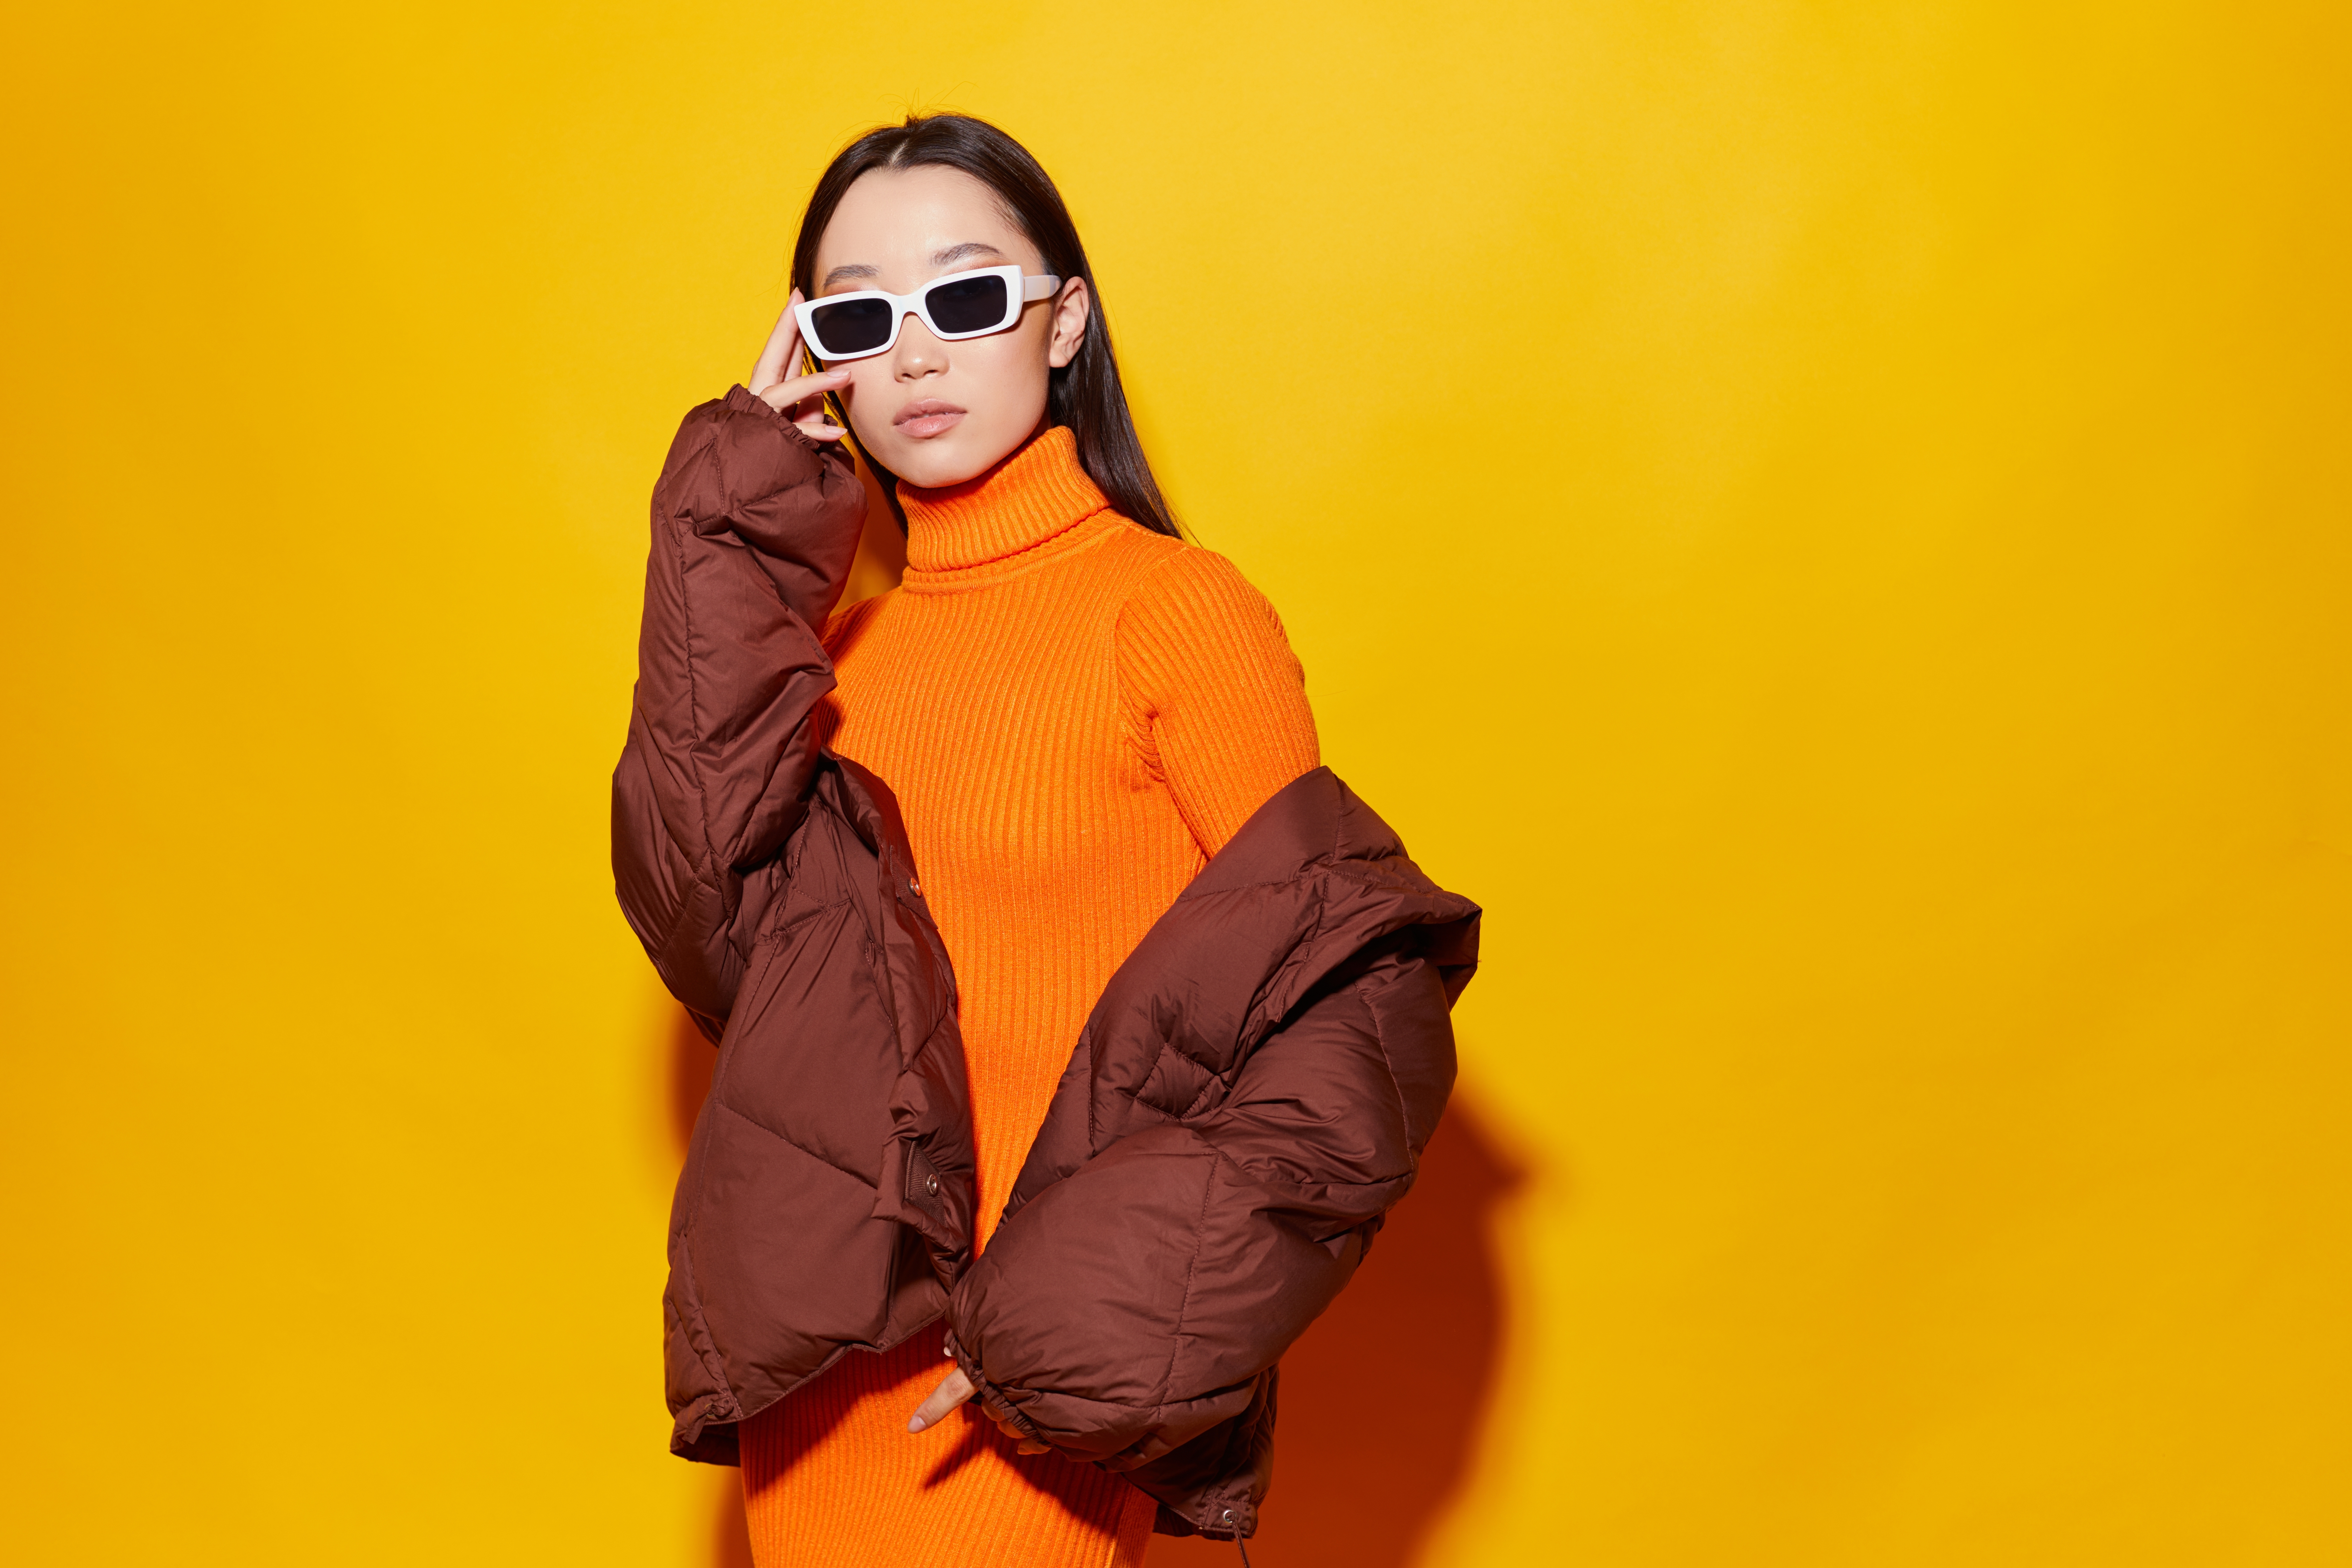 Stock photo of a young Asian woman in stylish clothes and sunglasses in front of a sunny yellow background.